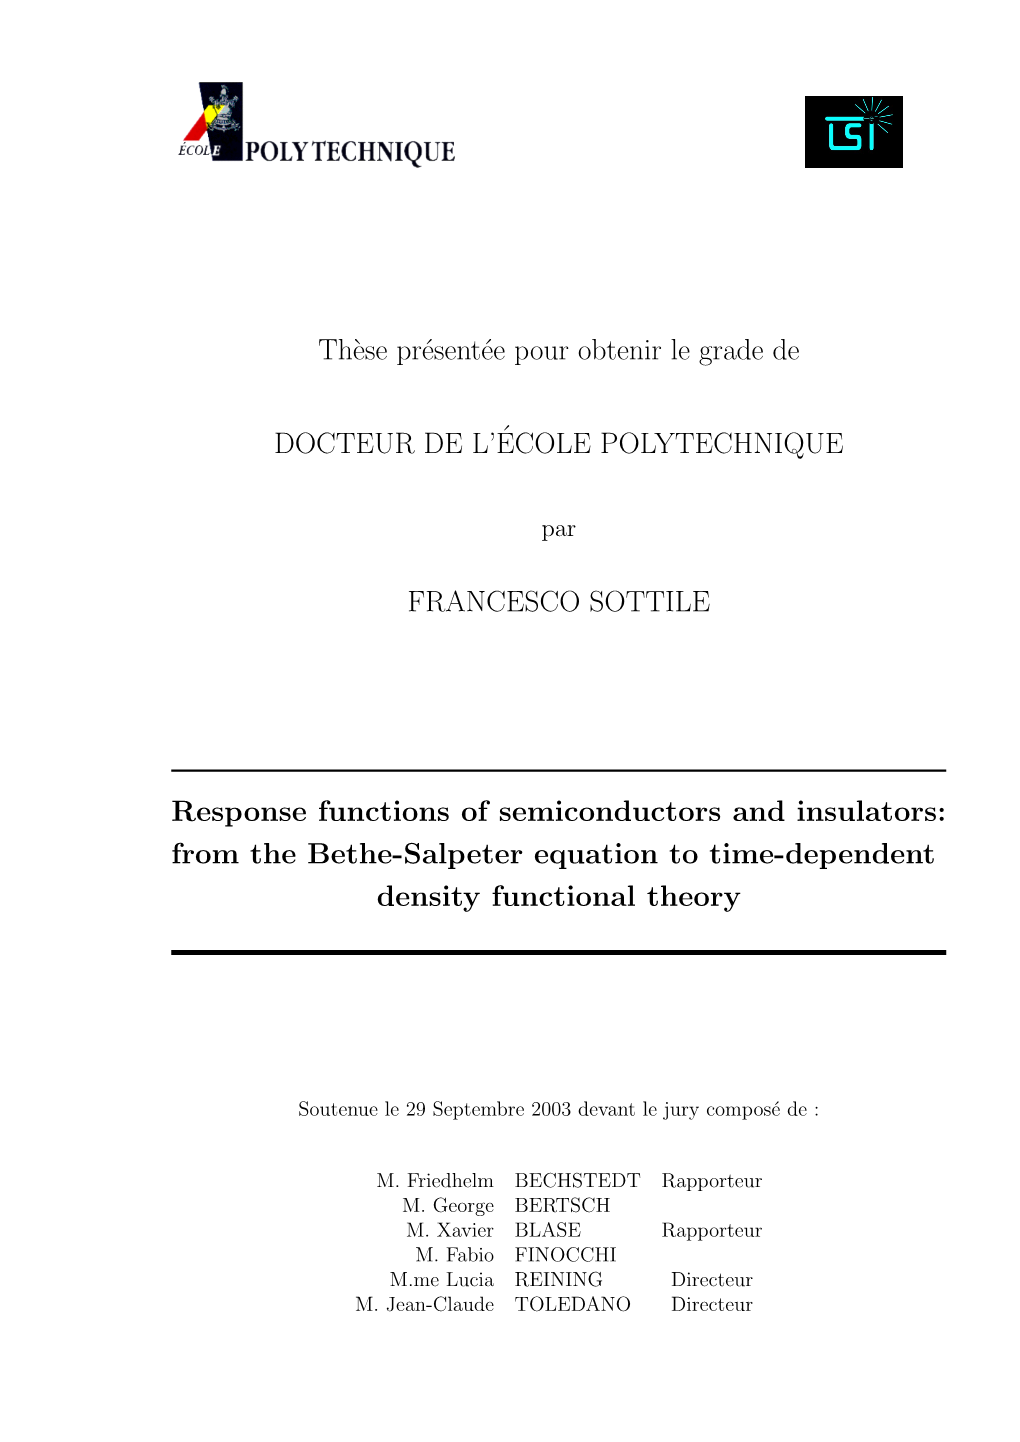 From the Bethe-Salpeter Equation to Time-Dependent Density Functional Theory